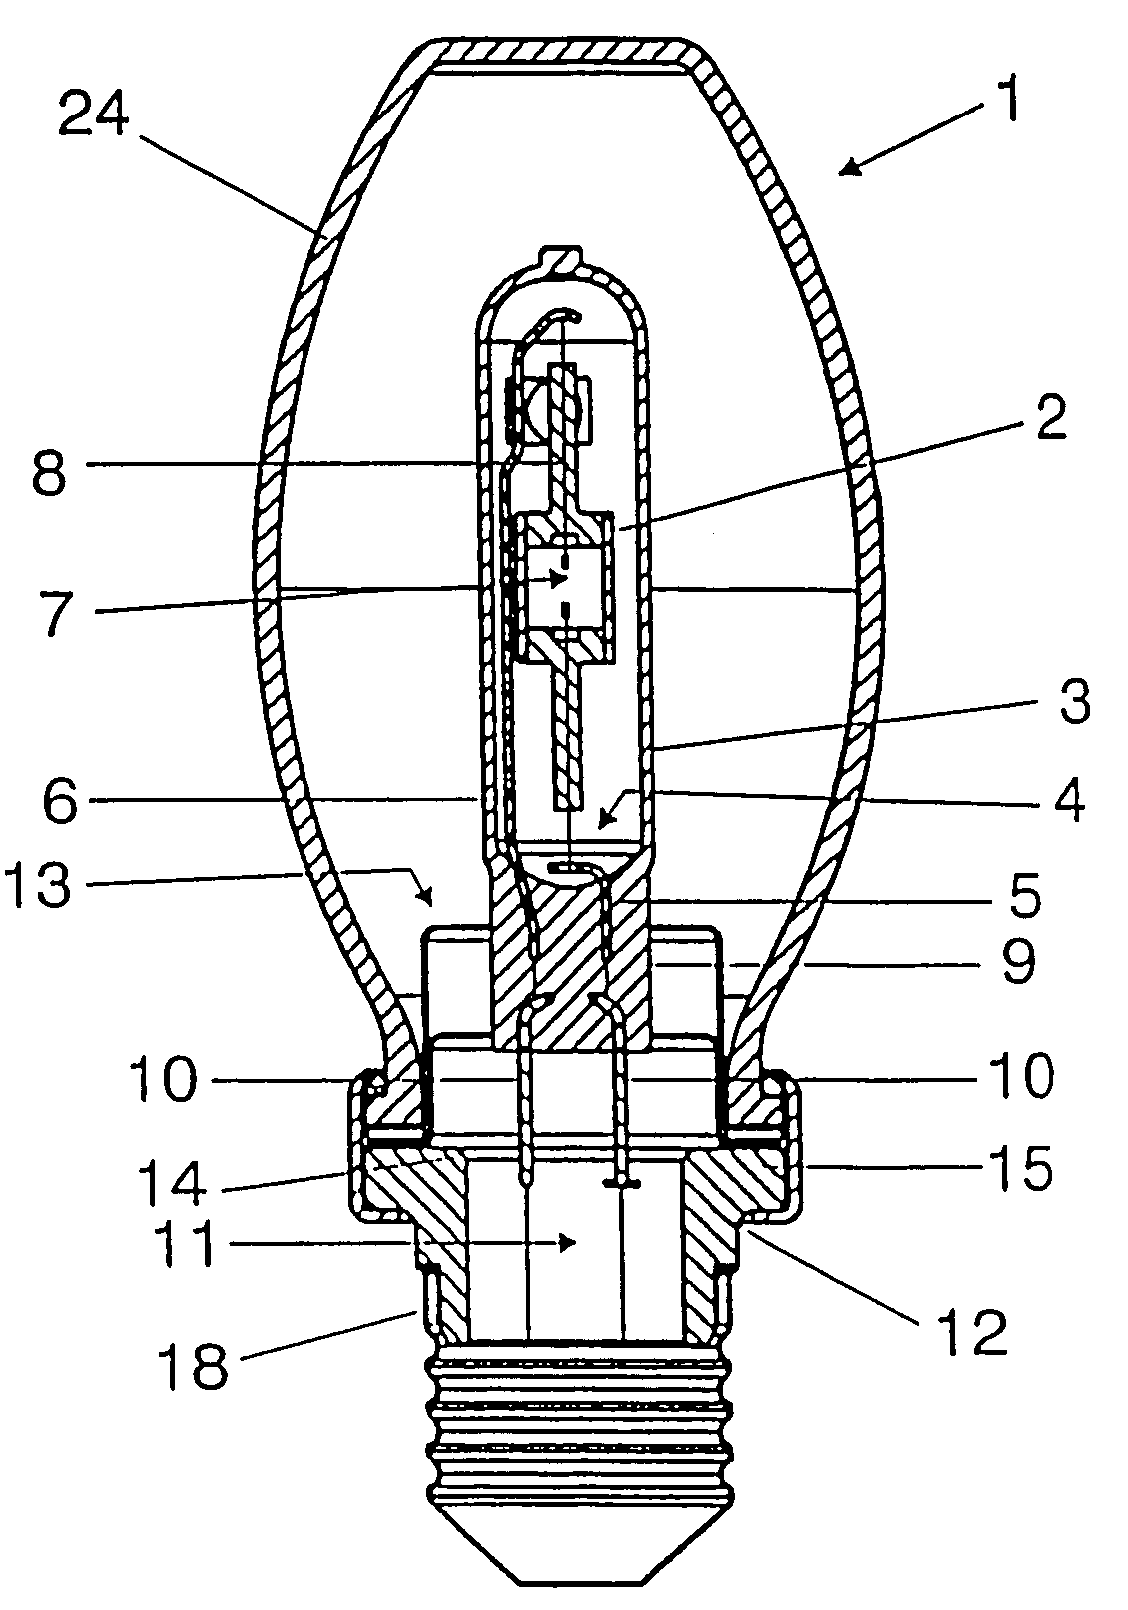 Holding device for fixing a lamp bulb and associated lamp